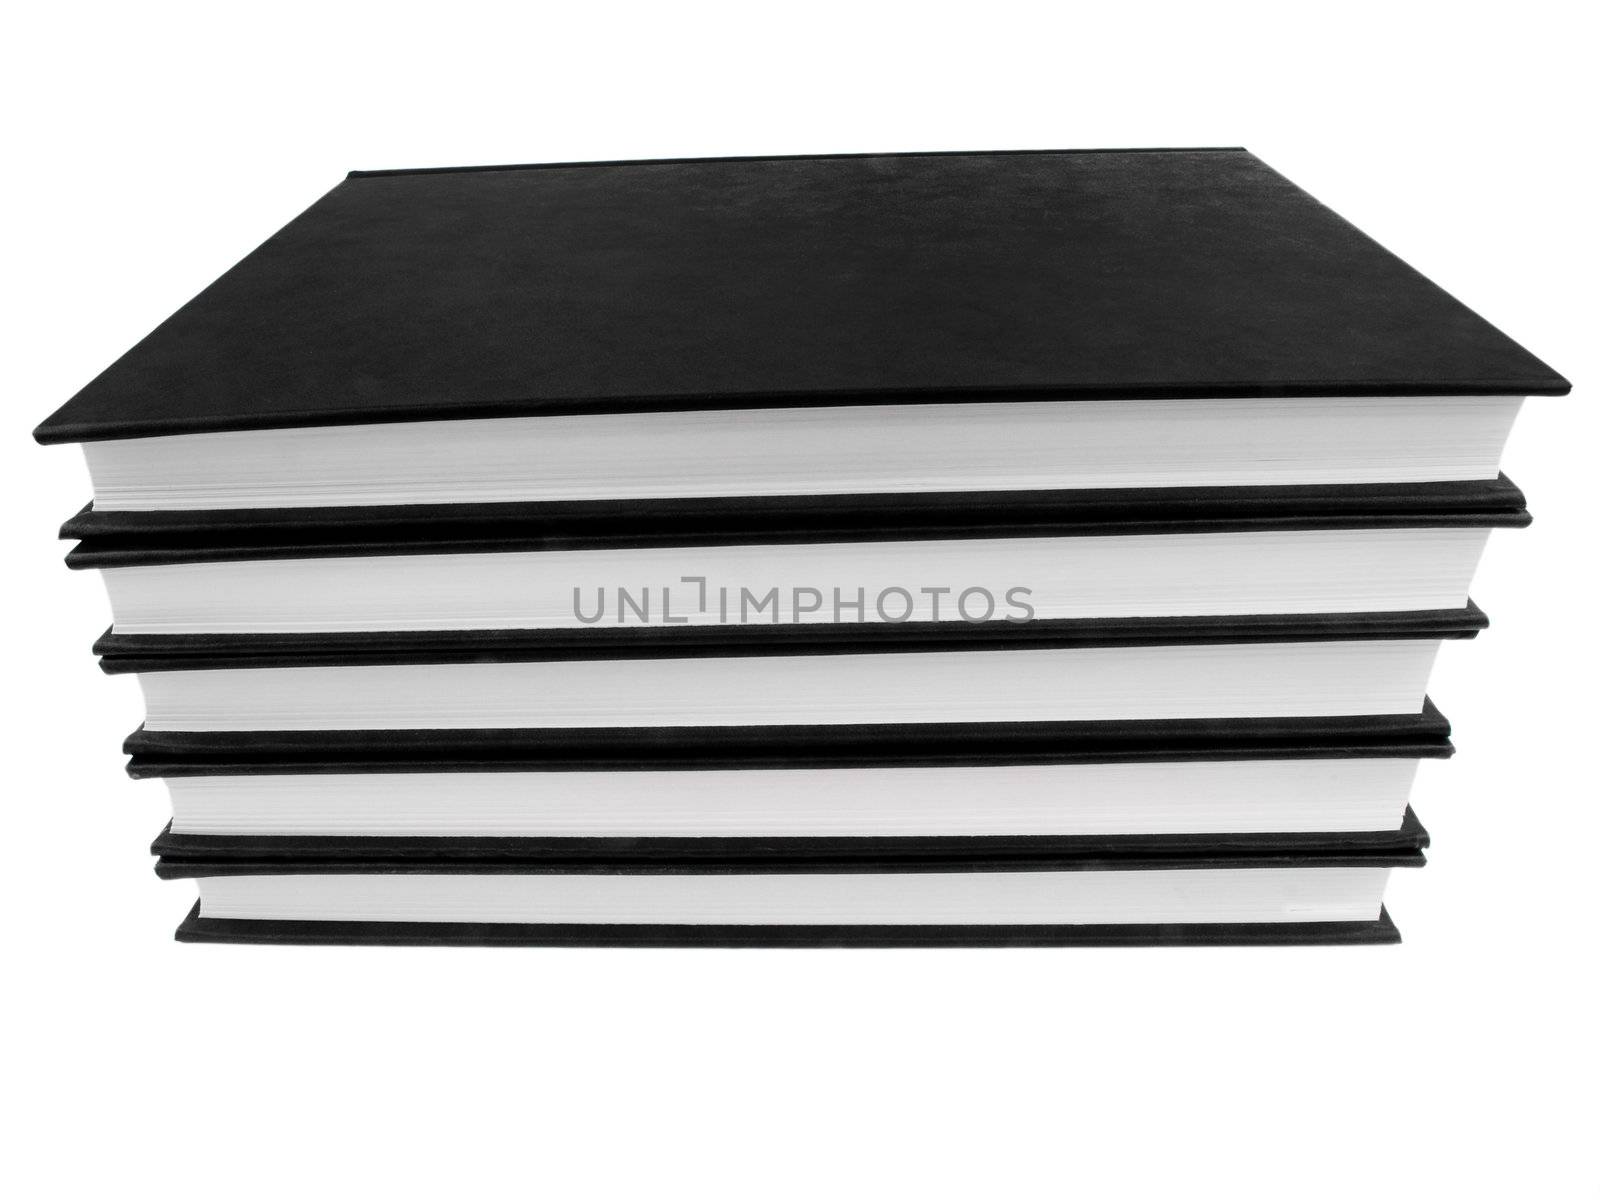 Pack of books in black covers on white background